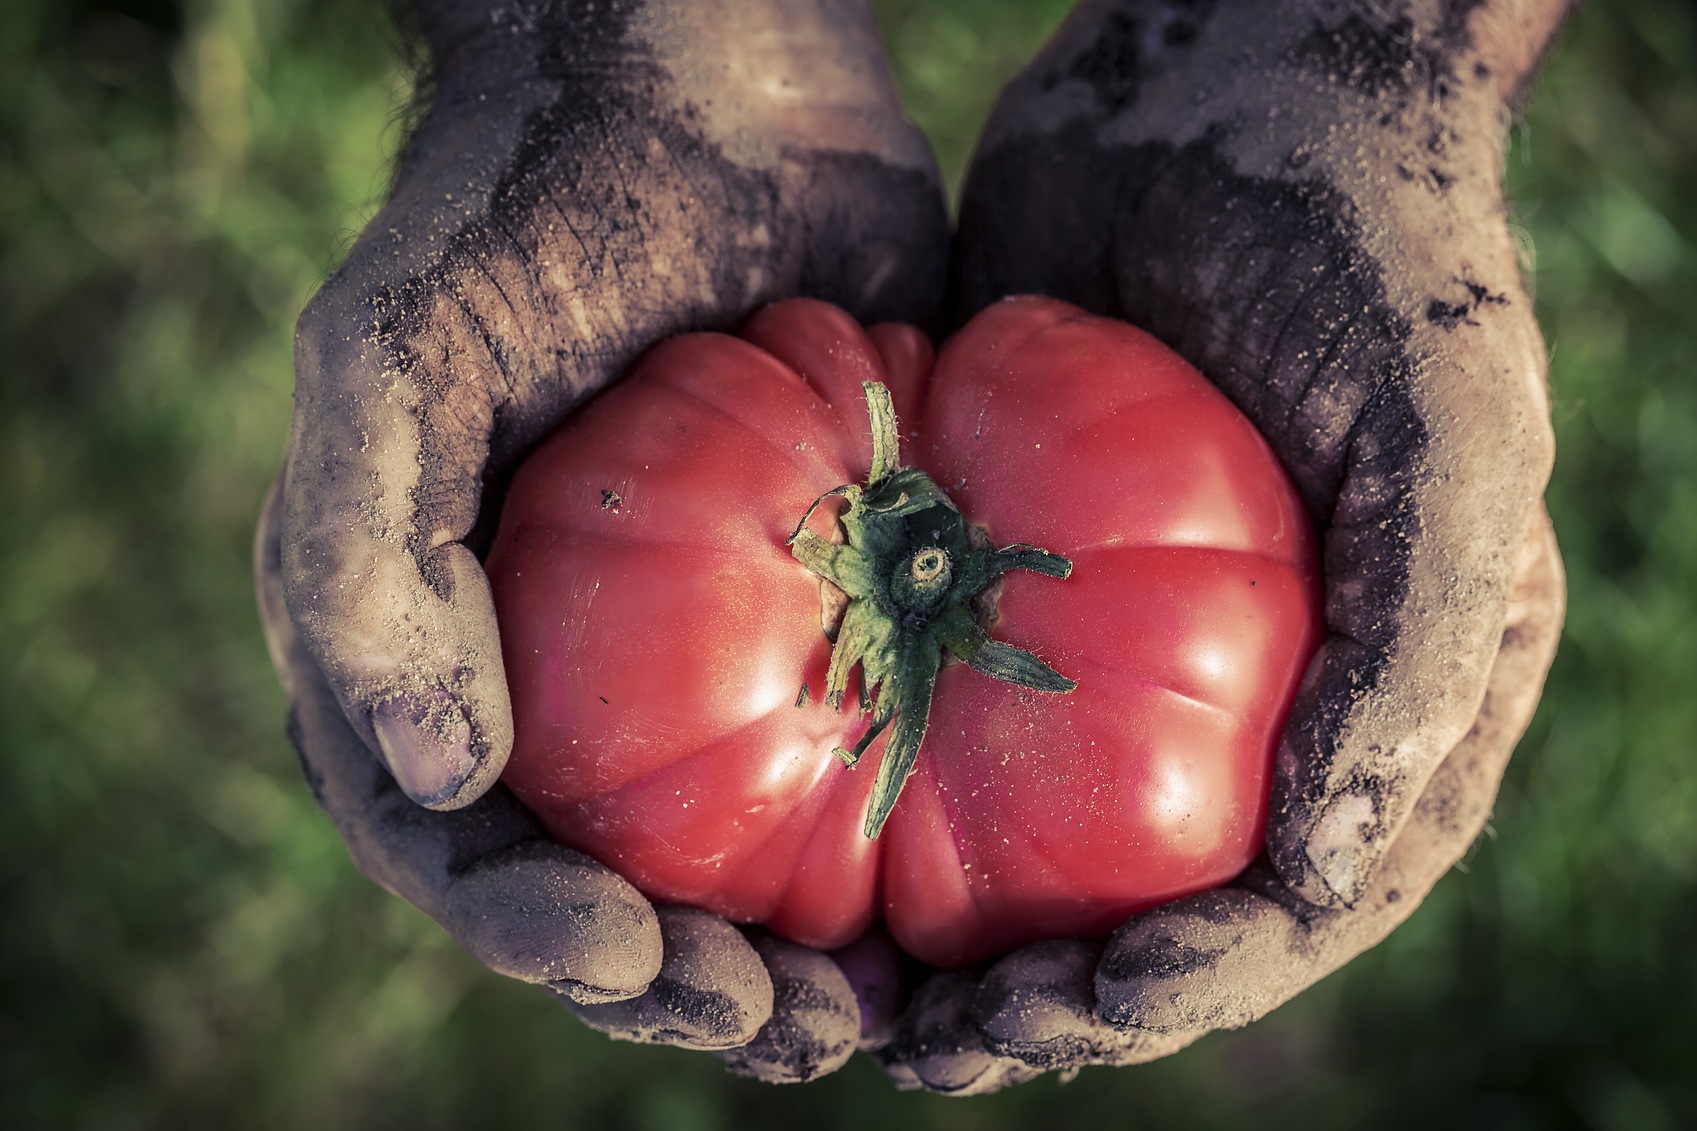 Freshly harvested tomatoes in hands.